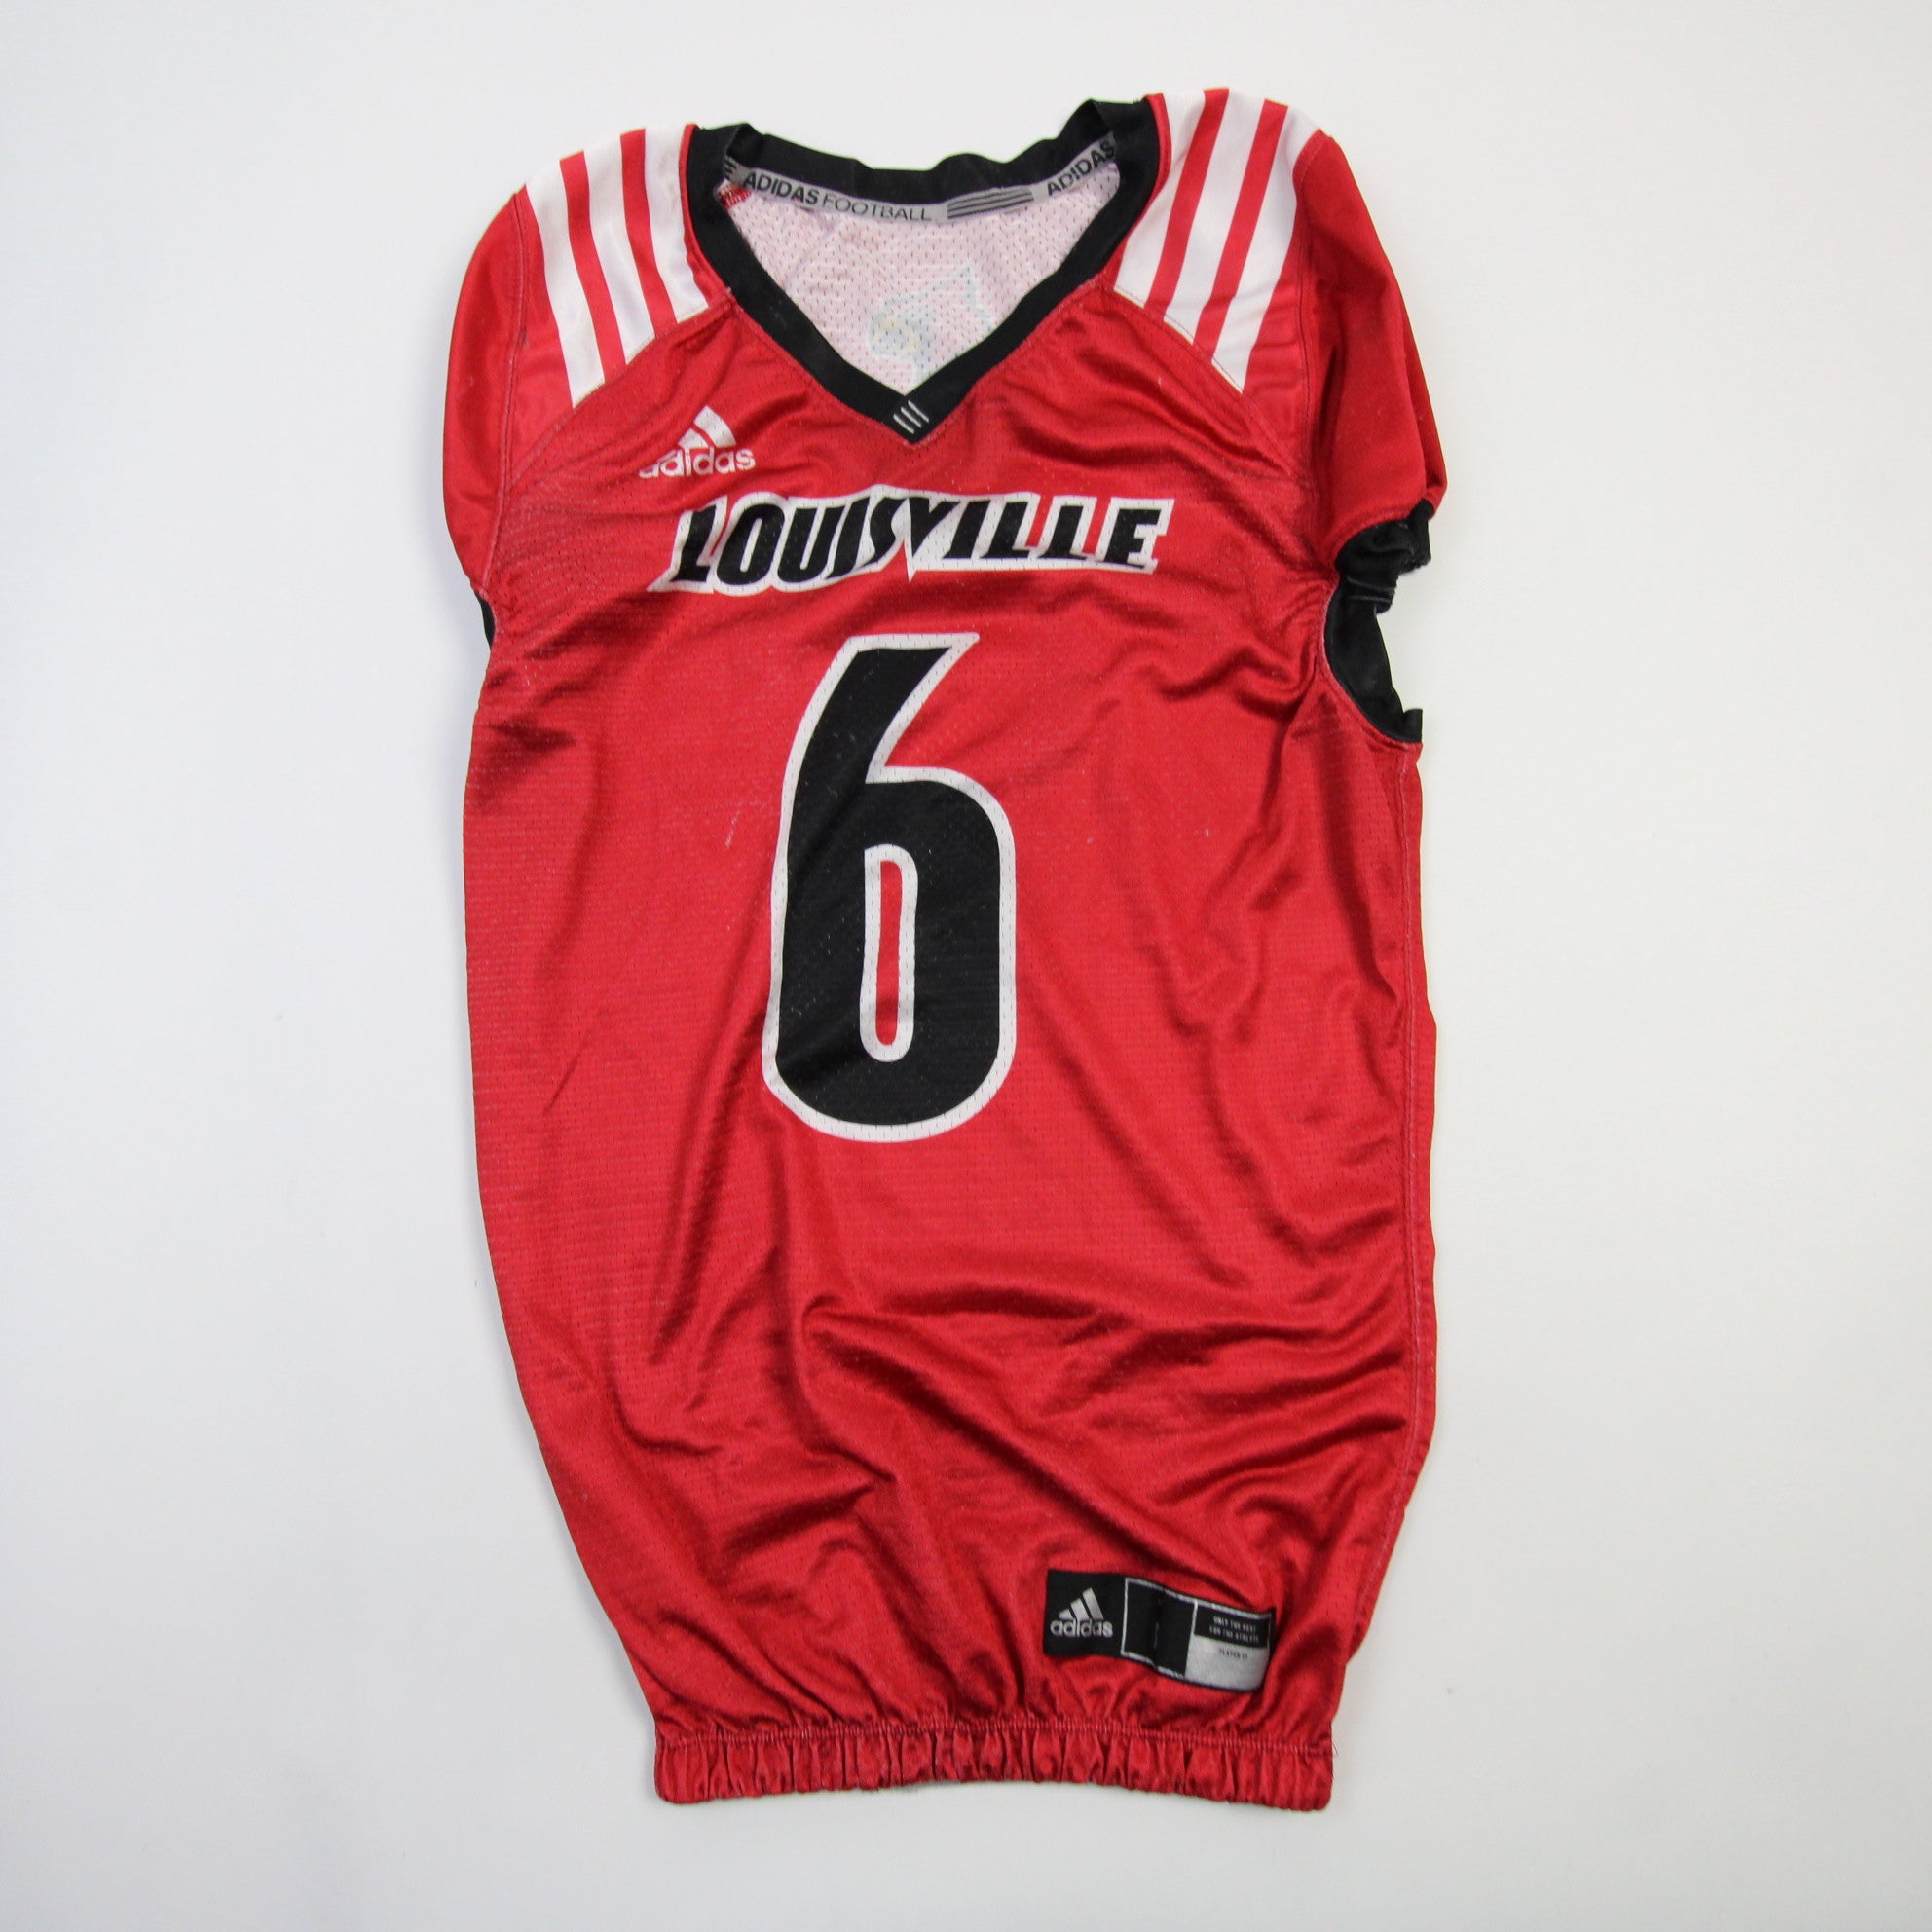 Louisville Cardinals adidas Practice Jersey - Football Men's White/Red  Used